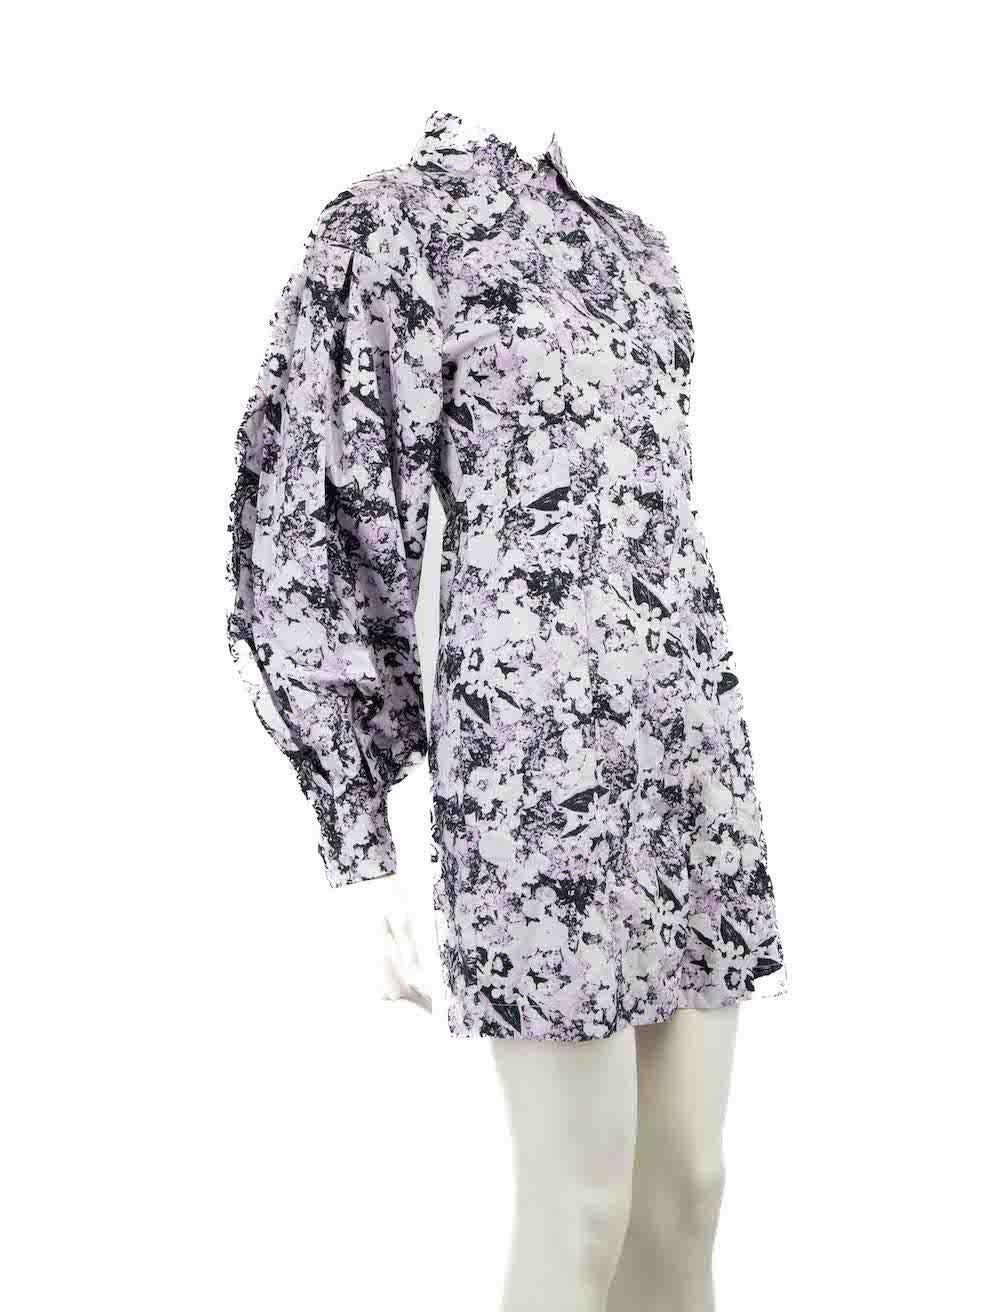 CONDITION is Never worn, with tags. No visible wear to dress is evident on this new Remain Birger Christensen designer resale item.
 
 
 
 Details
 
 
 Model: Marilo dress
 
 Purple
 
 Cotton
 
 Shirt dress
 
 Floral print
 
 Mini
 
 Button up